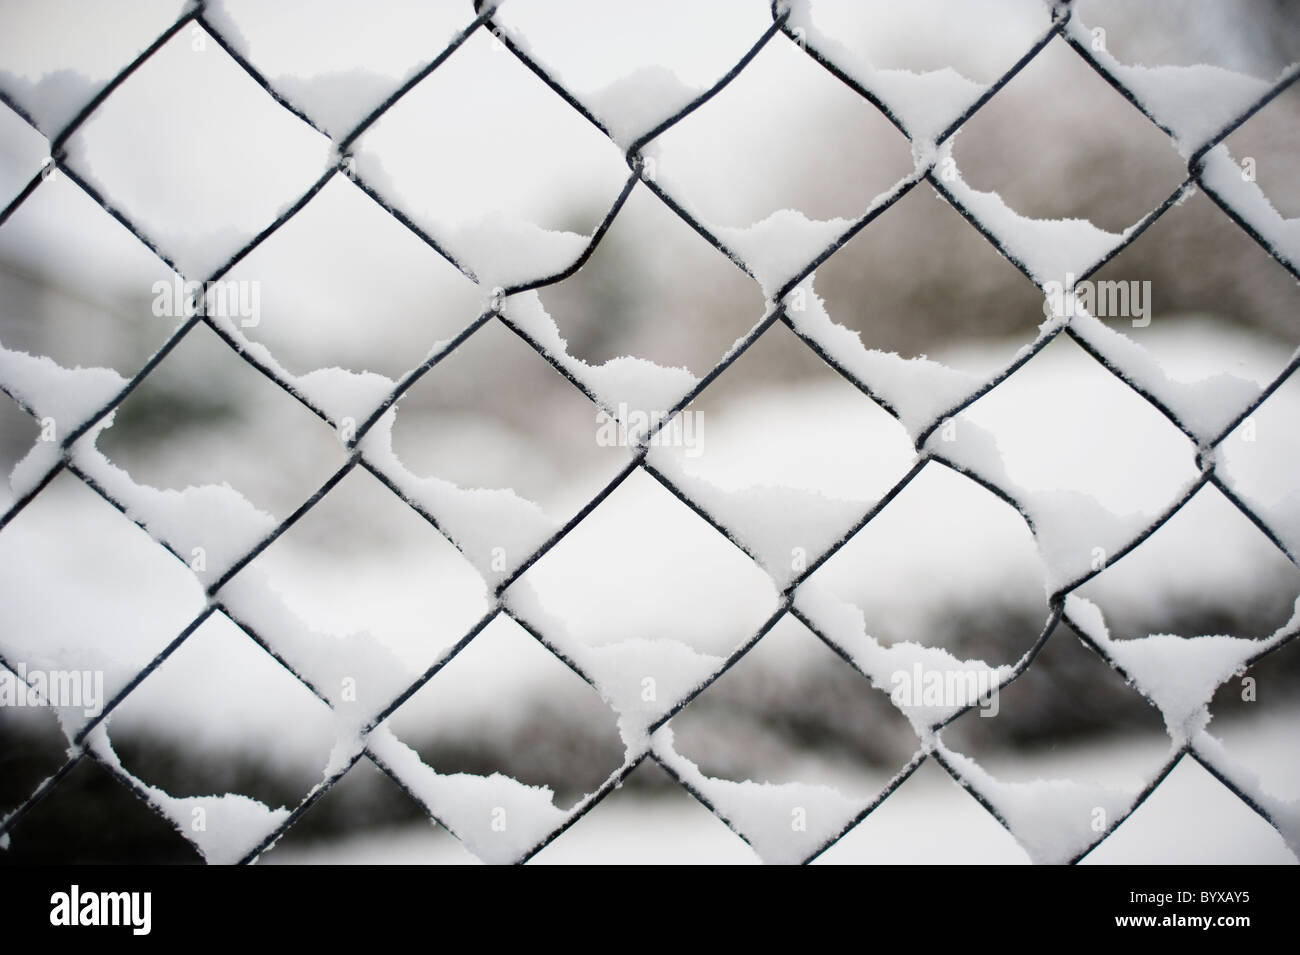 chain link fence in the snow with snow settling on the thin wires of the fence Stock Photo